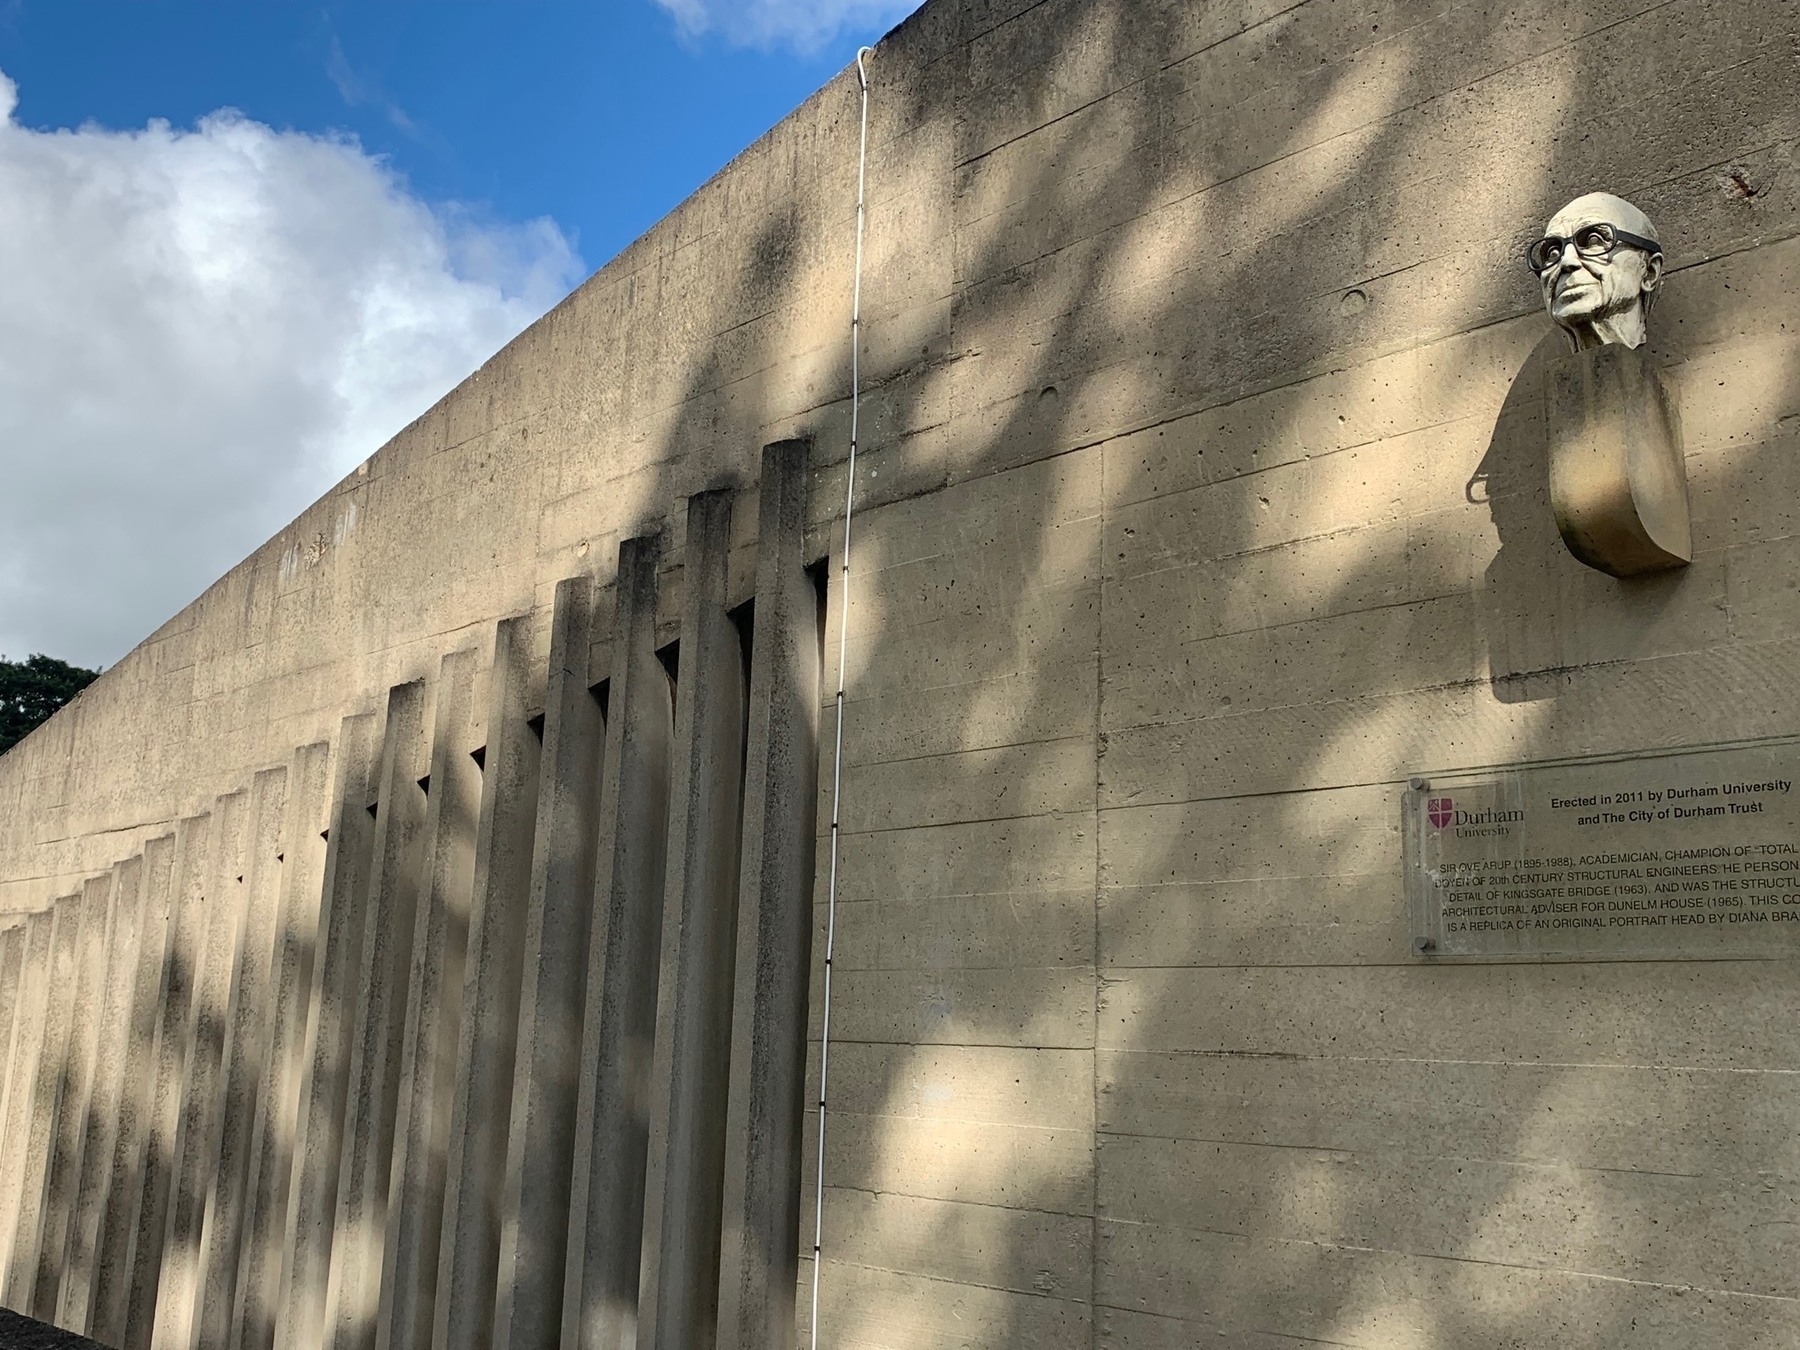 Side of a concrete building with multiple narrow vertical windows and a small bust of the architect Ove Arup sitting on a plinth attached to the wall.